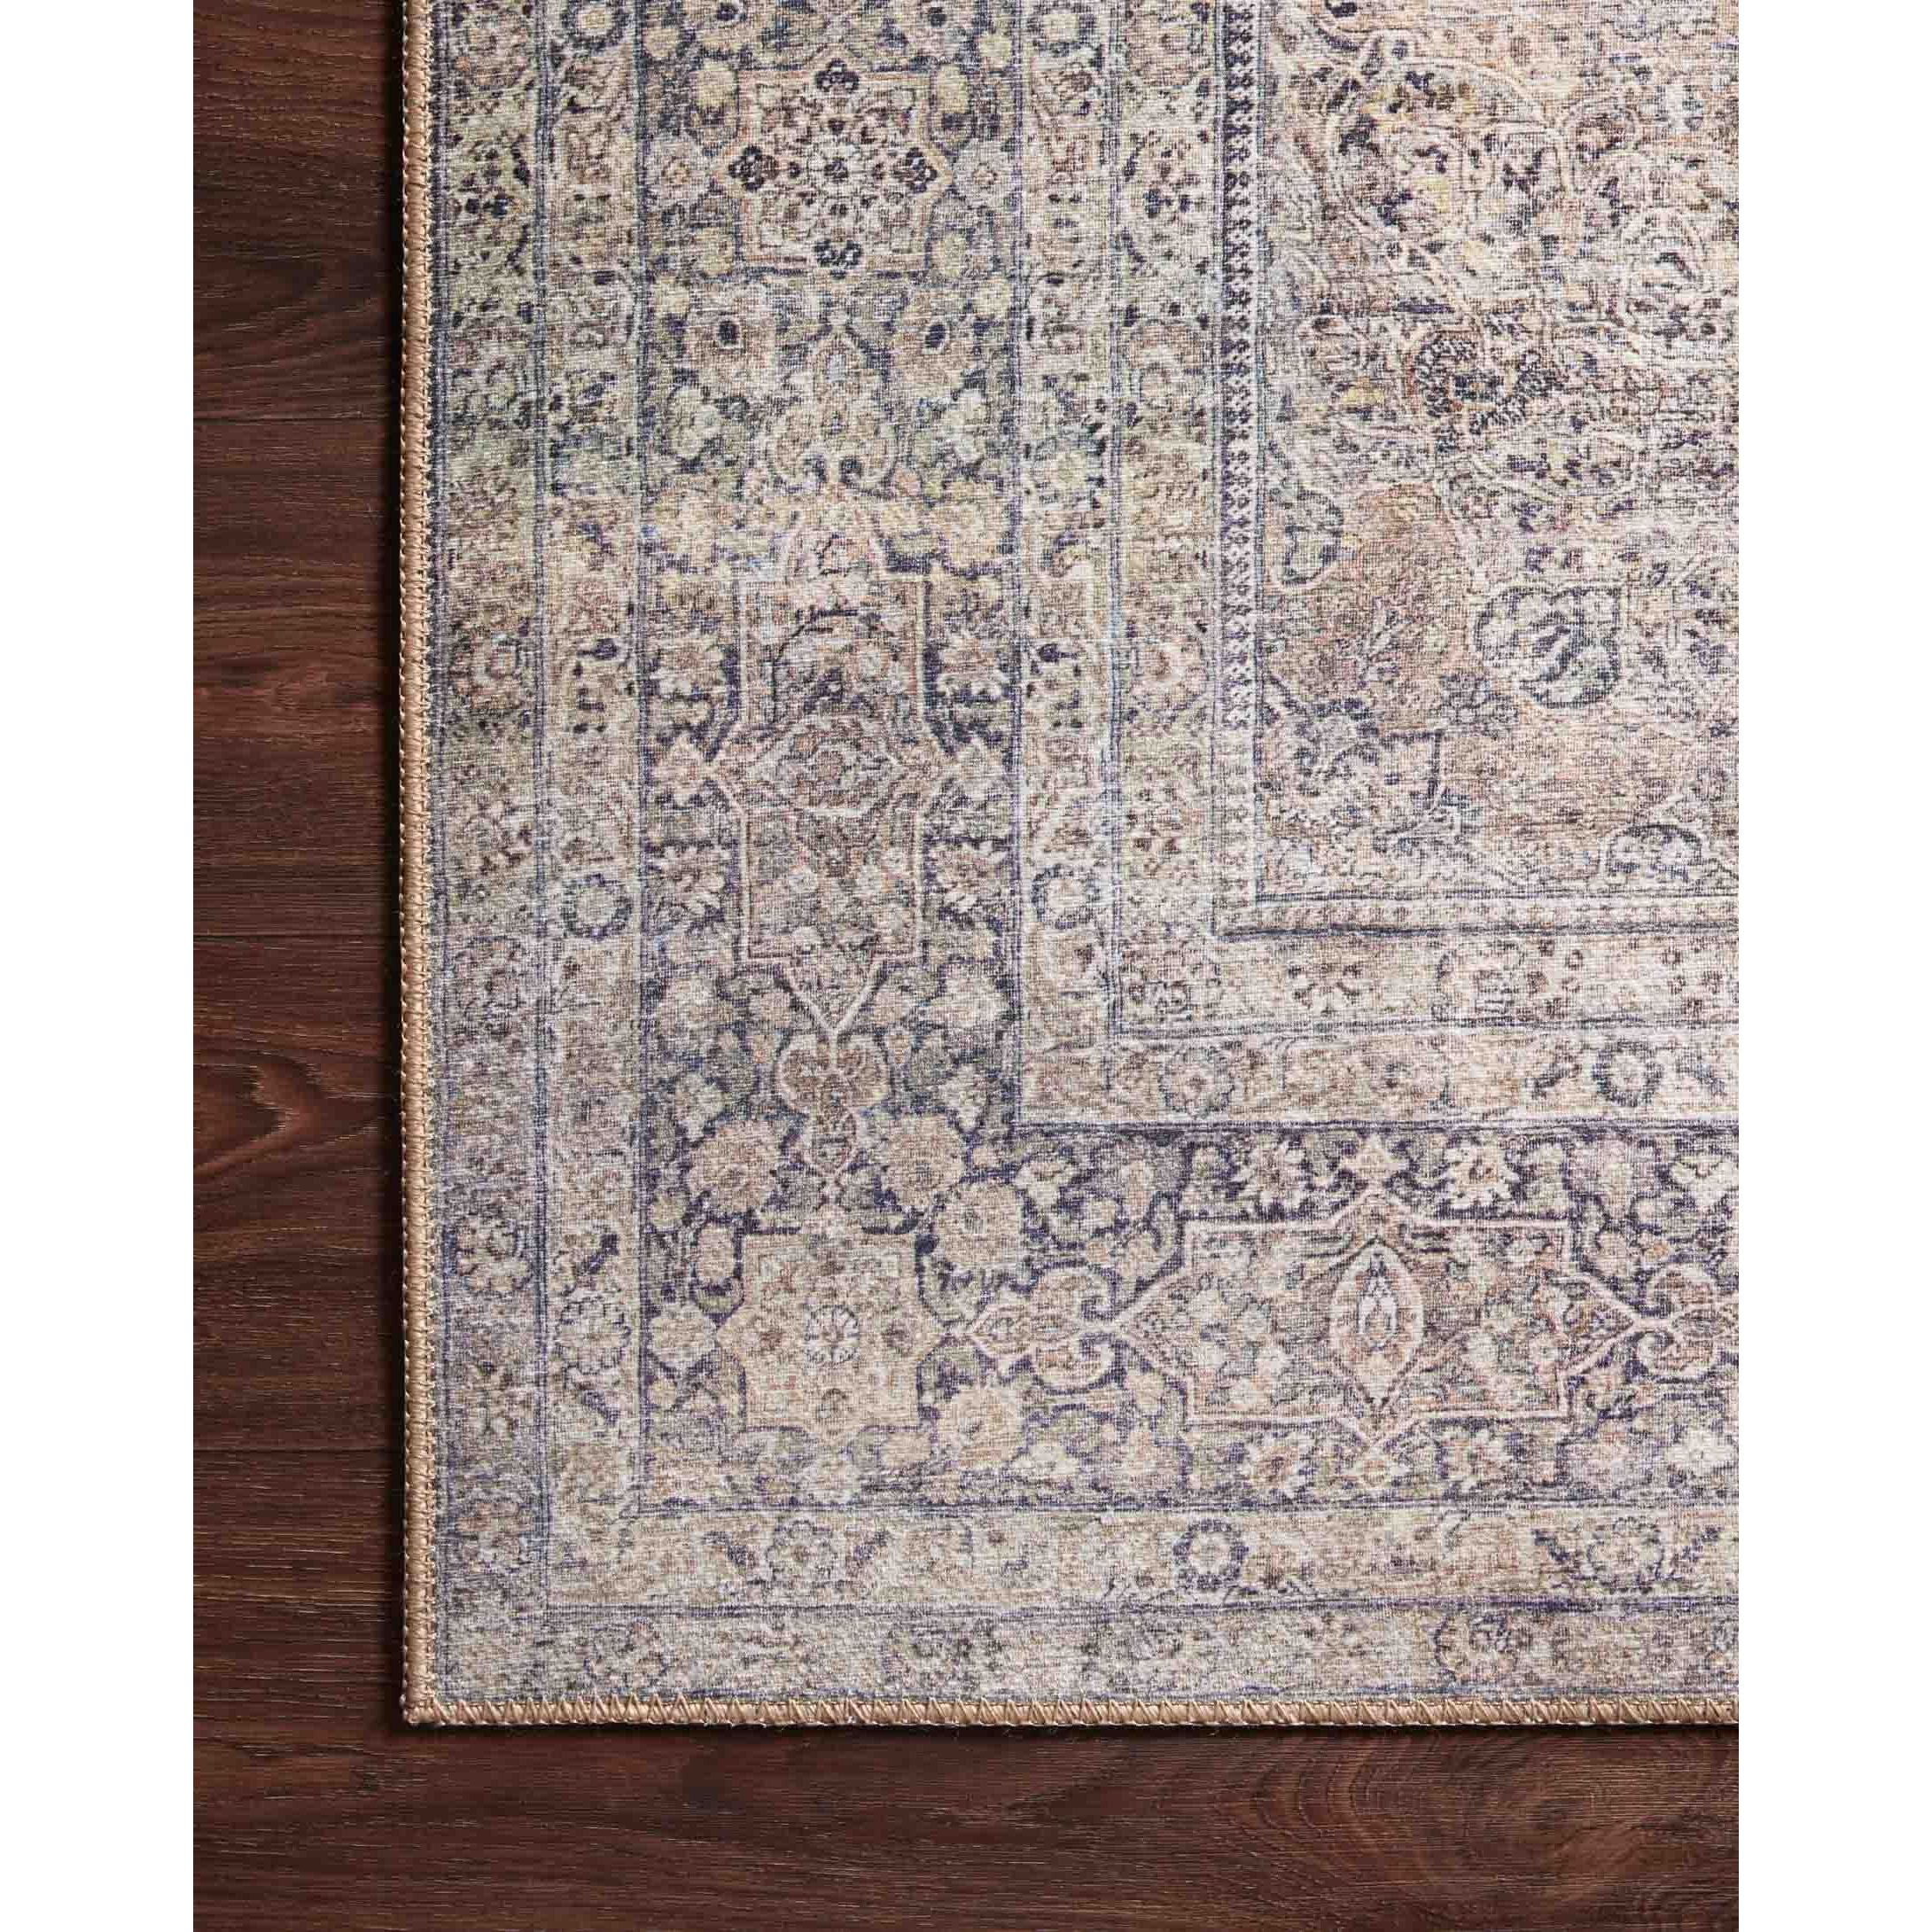 The Wynter Silver / Charcoal area rug showcases a one-of-a-kind vintage or antique area rug look power-loomed of 100% polyester. This rug brings in tones of silver, gray, blue, tan, and hints of green. The rug is ideal for high traffic areas such as living rooms, dining rooms, kitchens, hallway, and entryways.